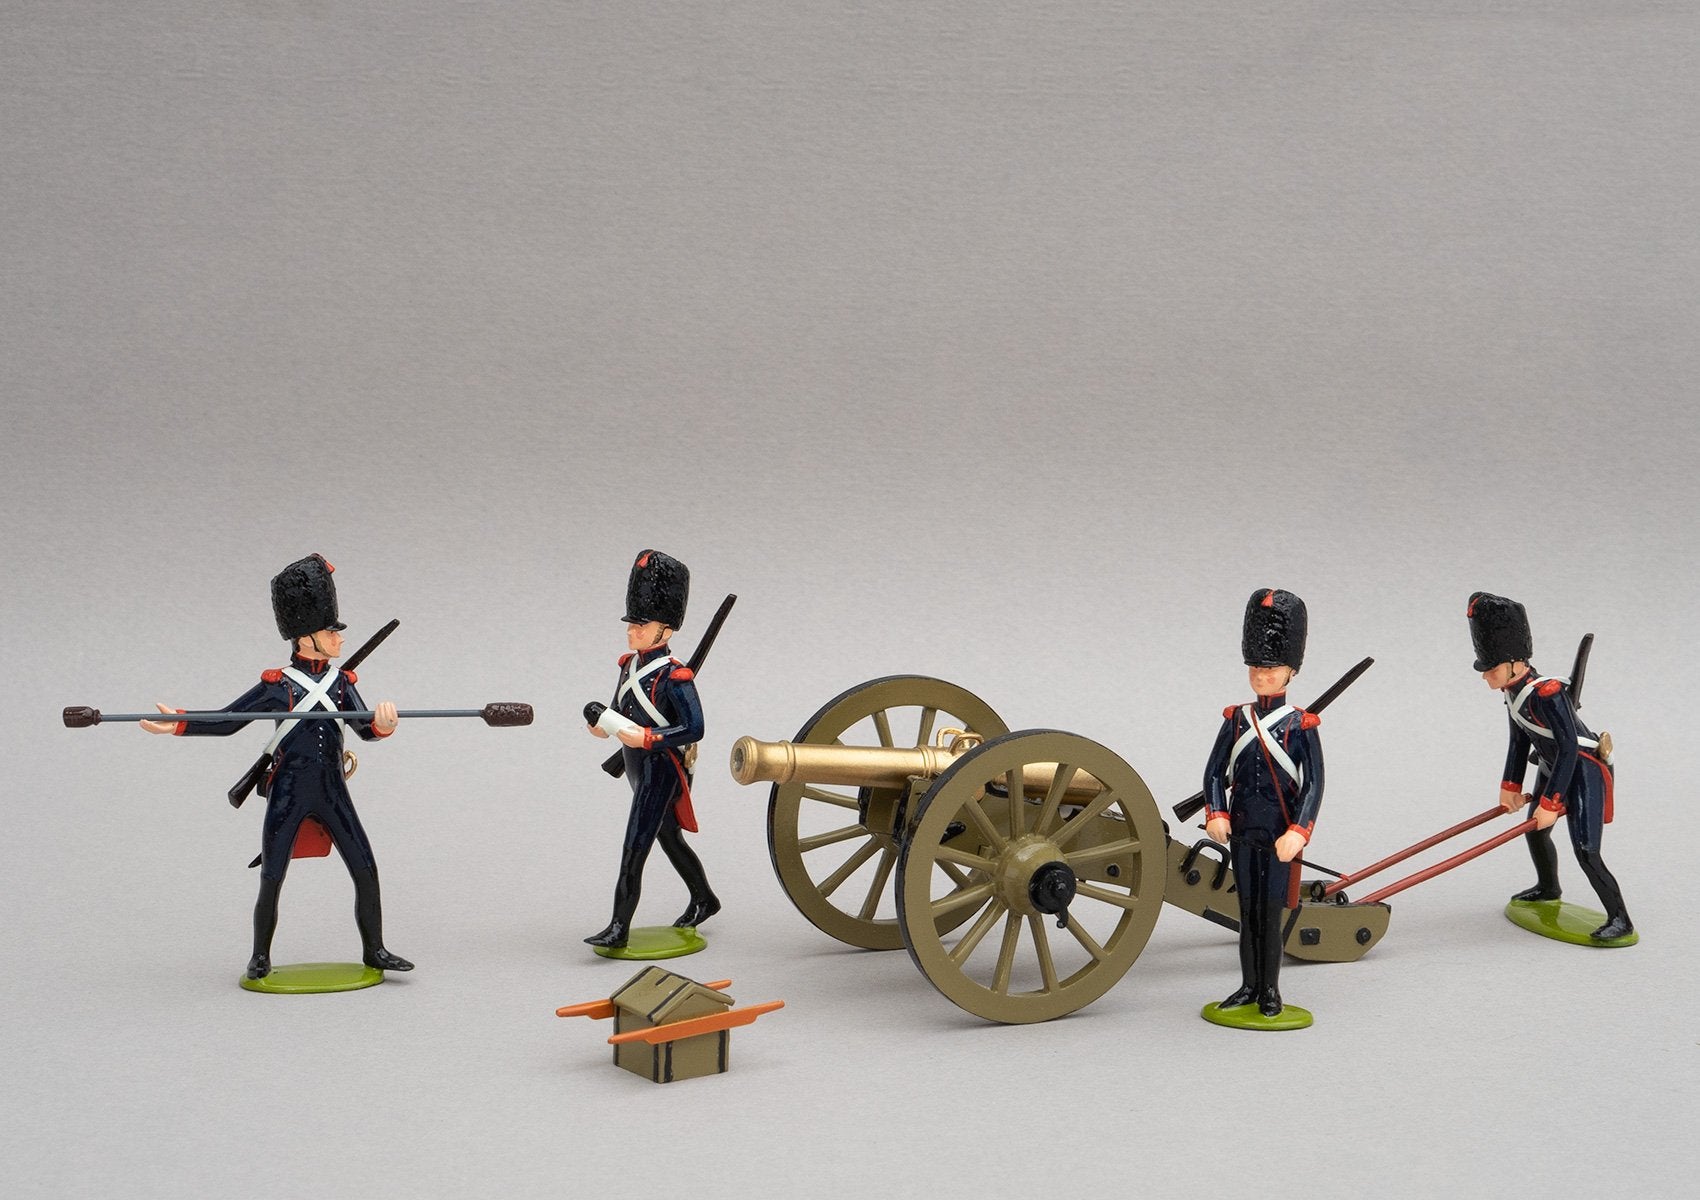 Set 130 Foot Artillery of the Guard | French | Napoleonic Wars | Gun crew of the Imperial Guard 12 pounder gun of the Gribeauval system. Set comprises a gun, and four gunners, and ammunition box. | Waterloo | © Imperial Productions | Sculpt by David Cowe